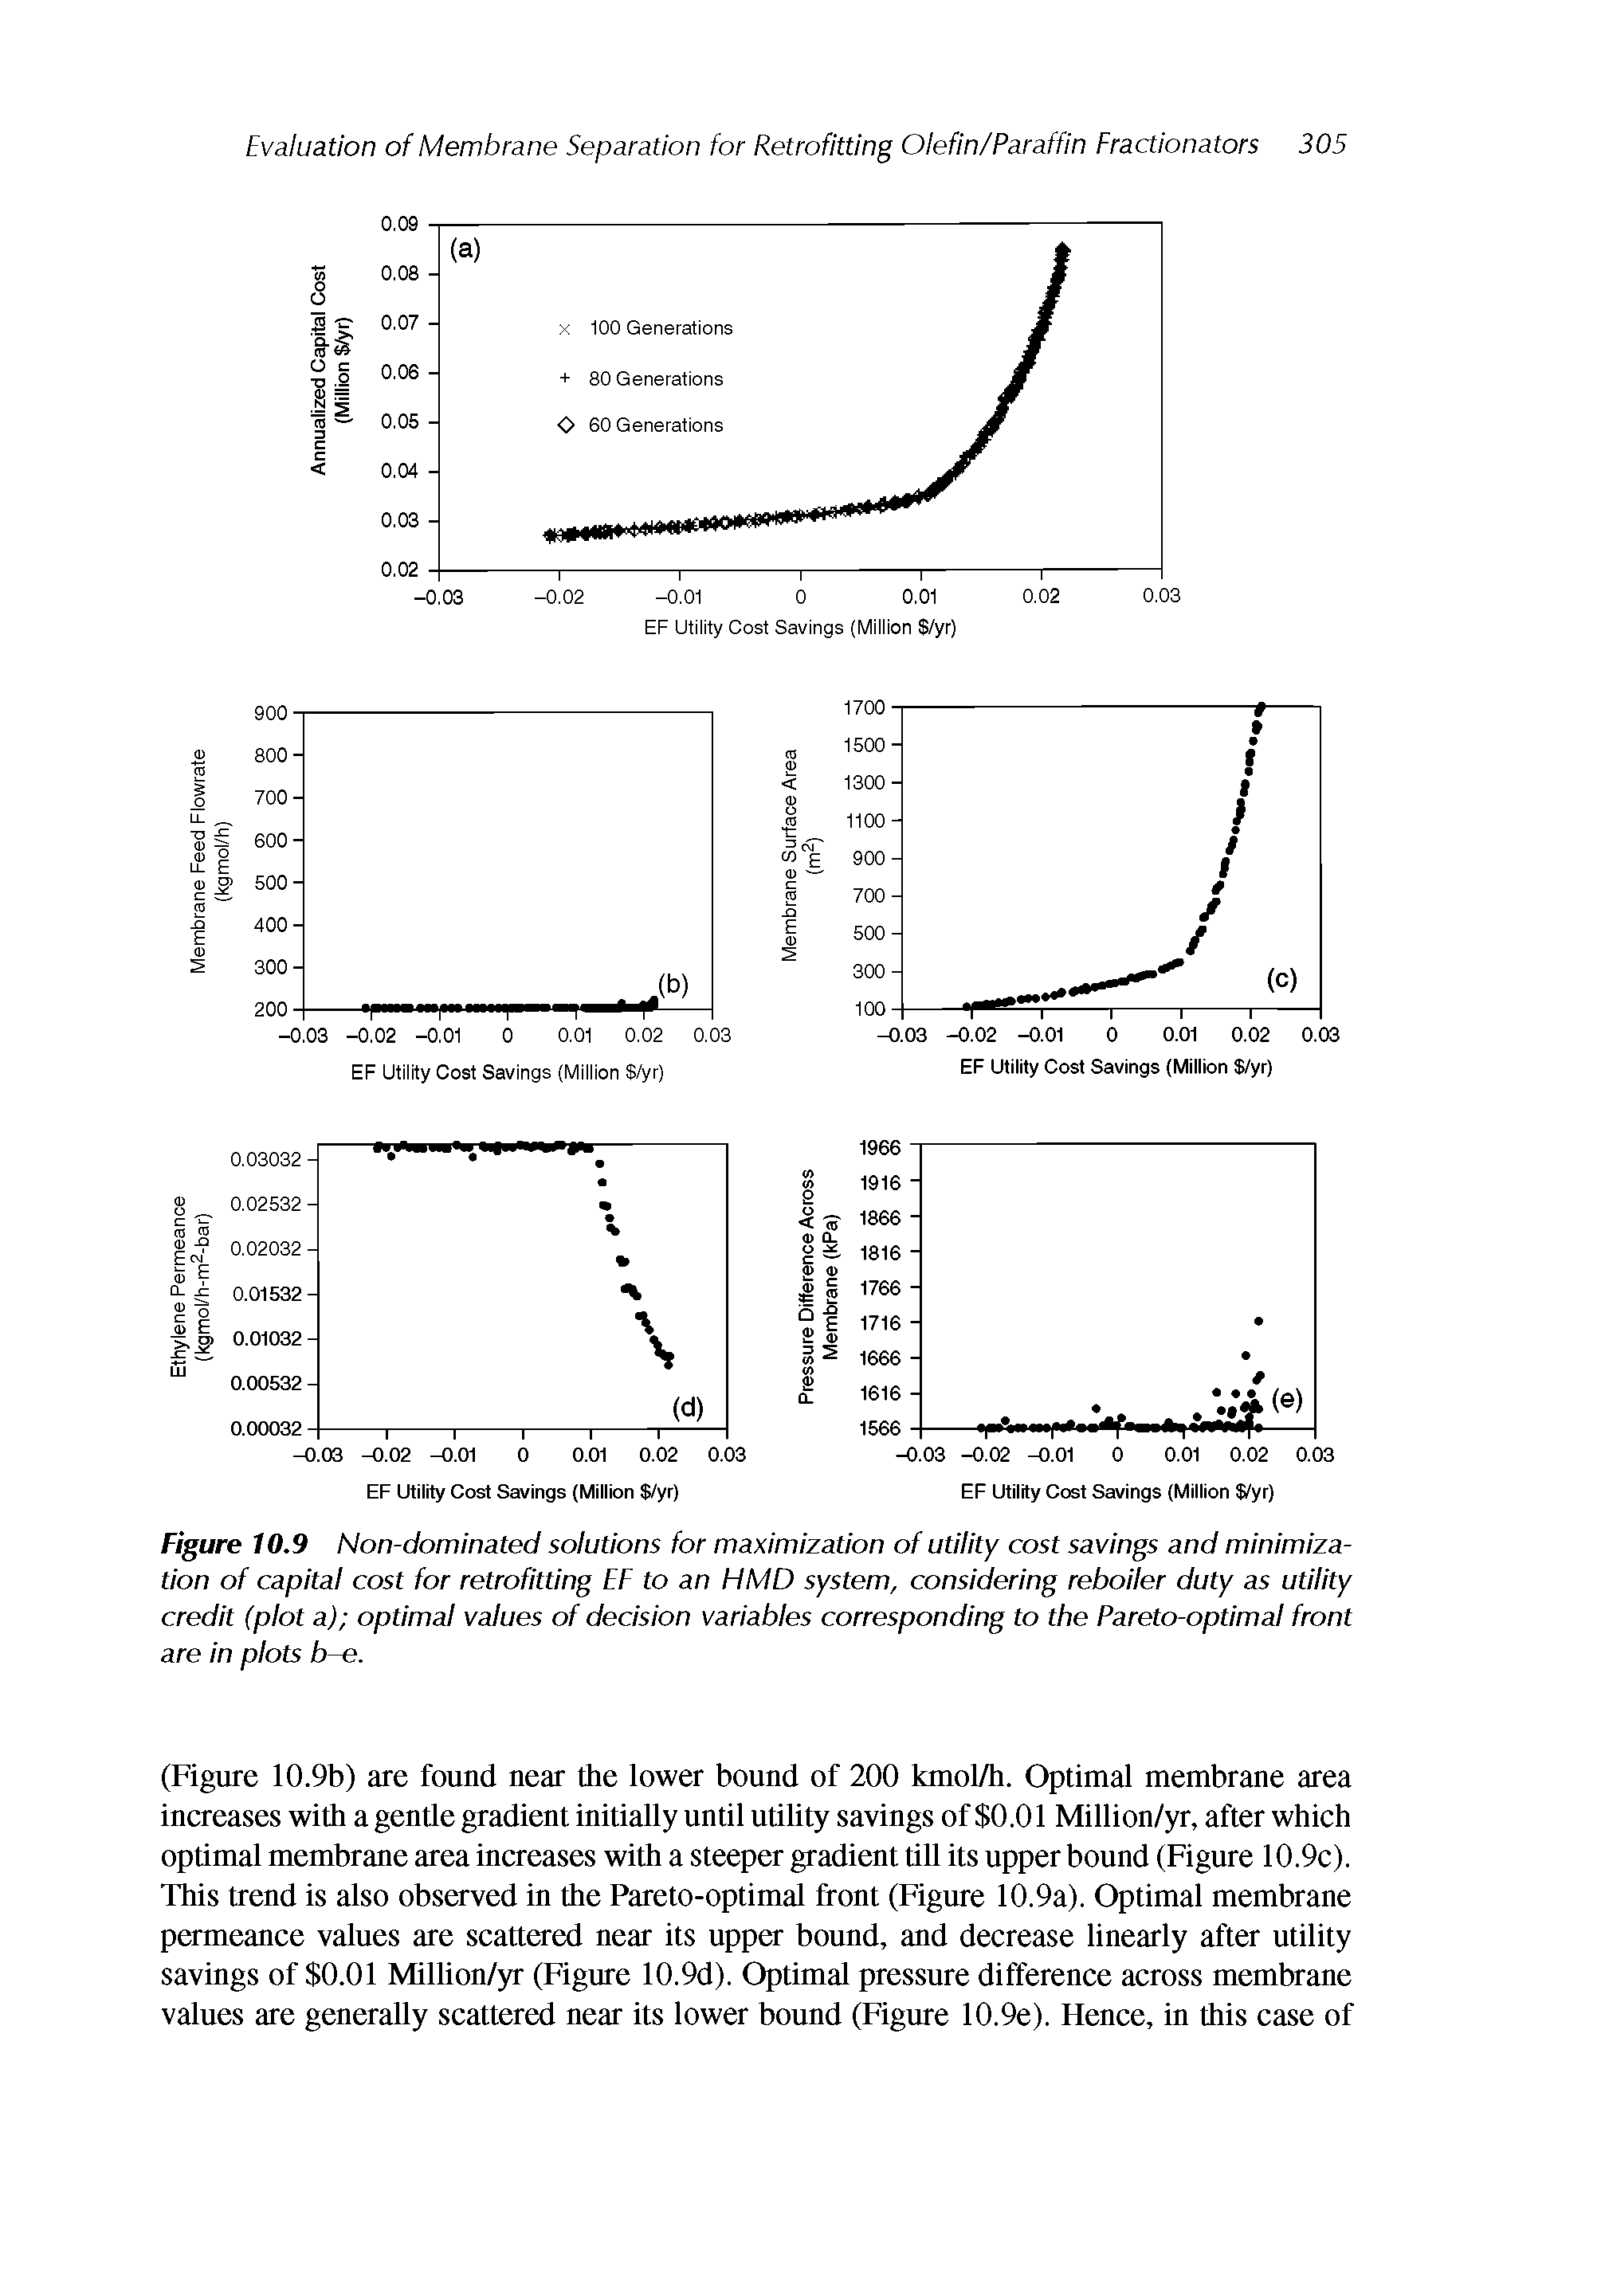 Figure 10.9 Non-dominated solutions for maximization of utility cost savings and minimization of capital cost for retrofitting EF to an HMD system, considering reboiler duty as utility credit (plot a) optimal values of decision variables corresponding to the Pareto-optimal front are in plots b-e.